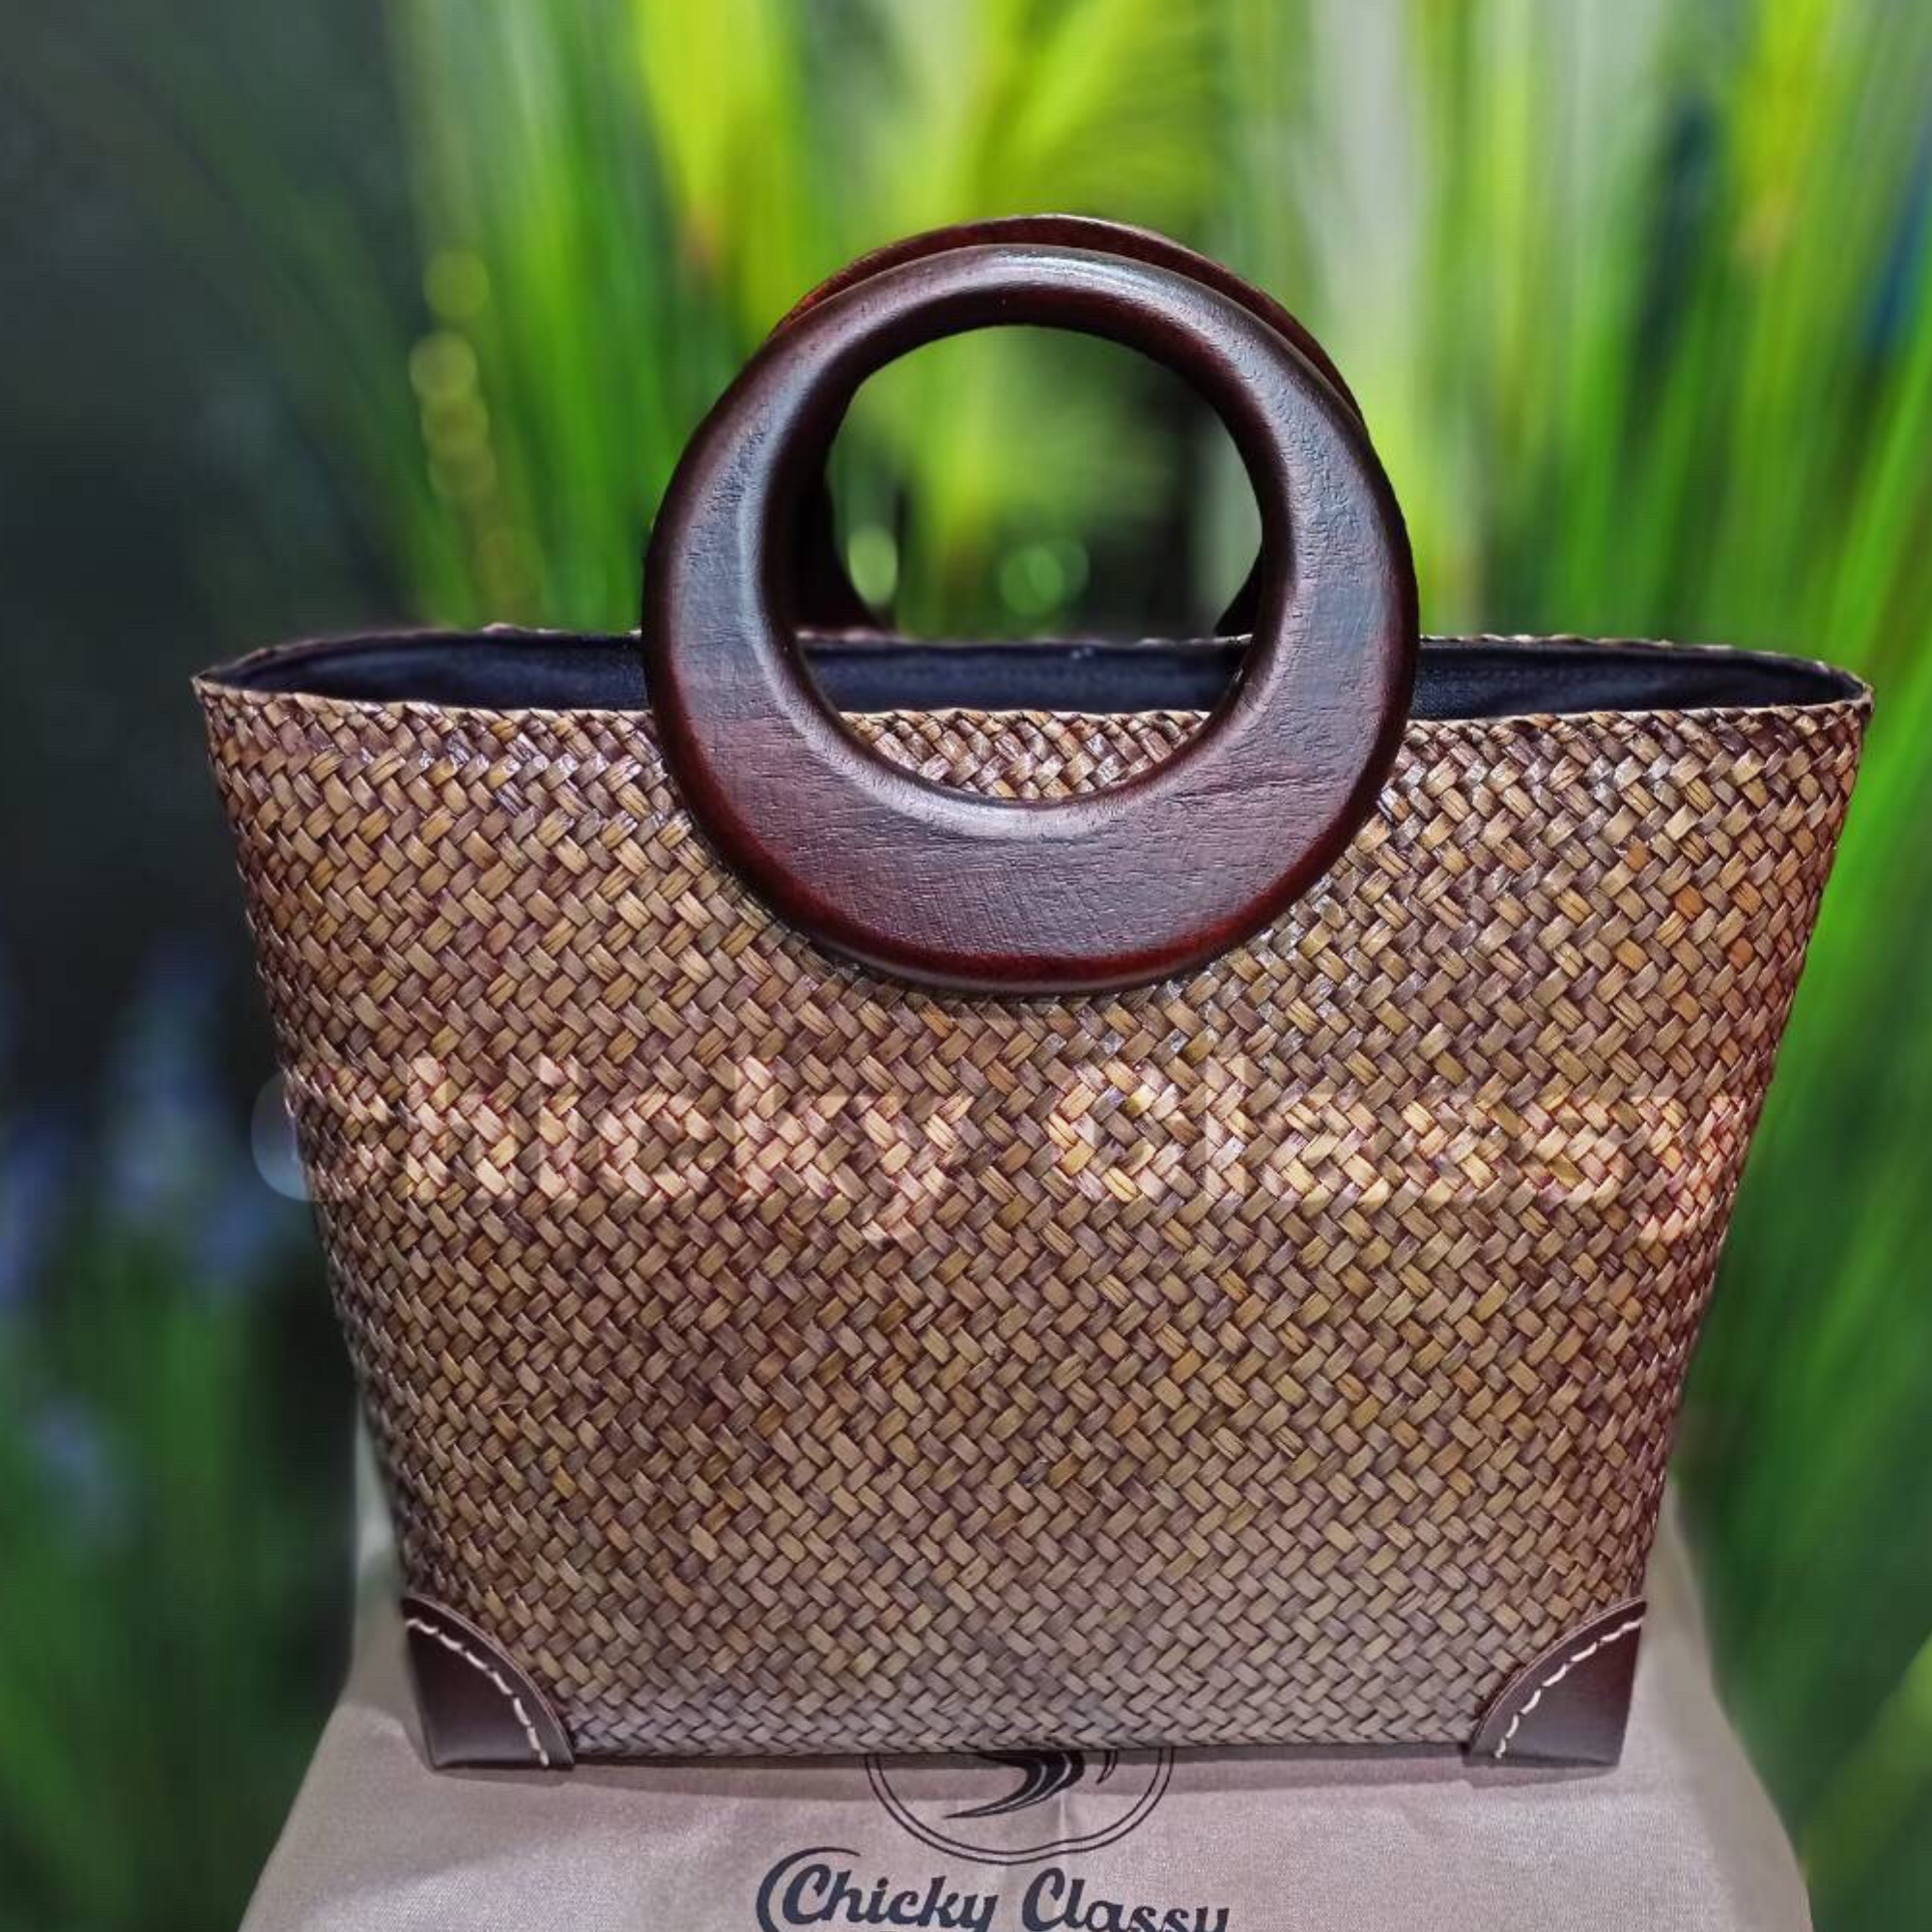 Chicky Classy Take me along home made bag